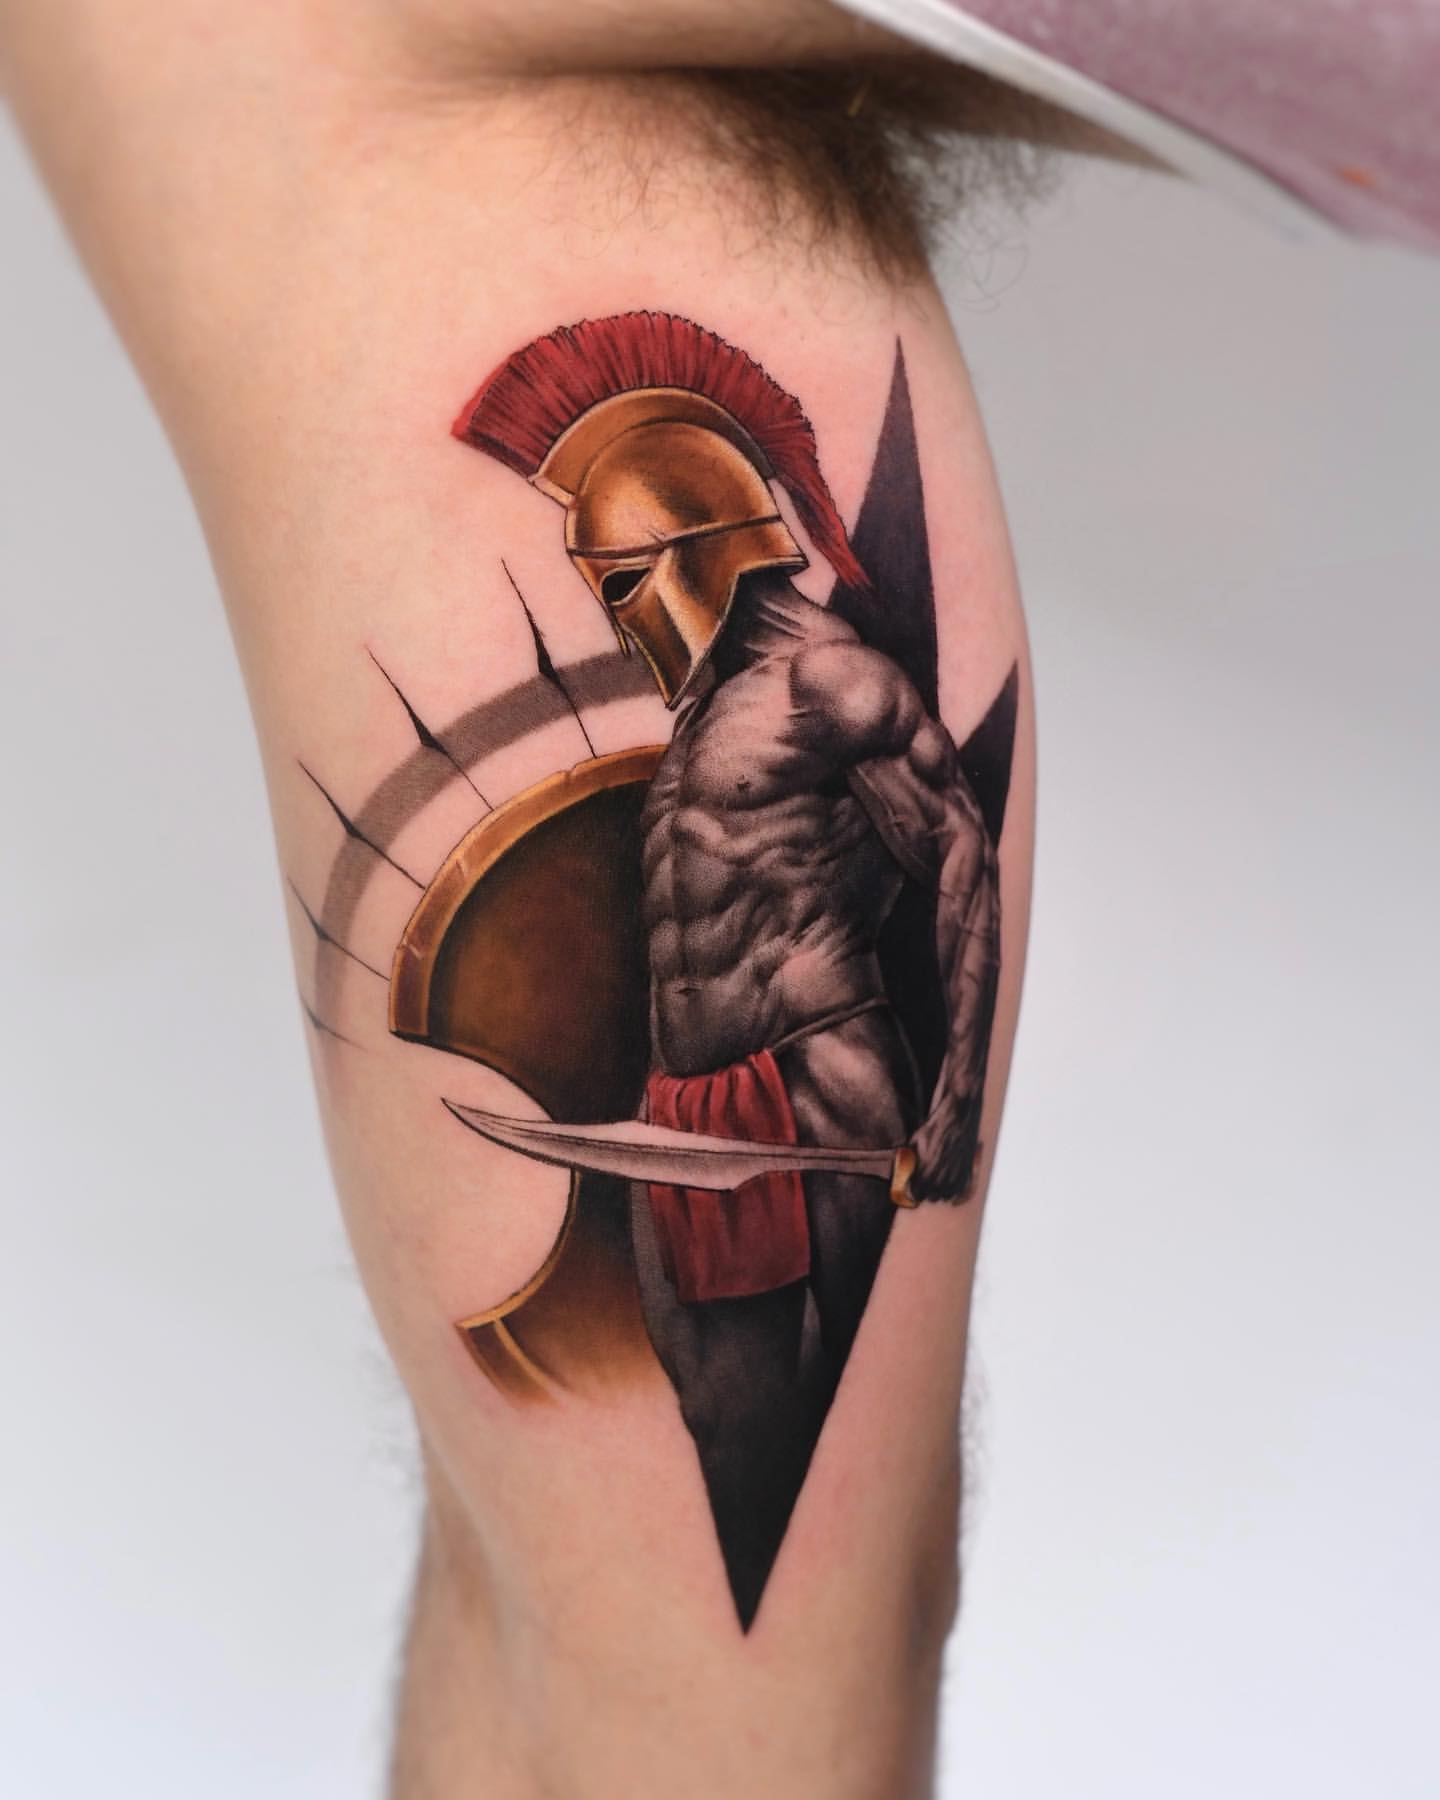 Angry Realistic Angel Warrior Tattoo Design Image